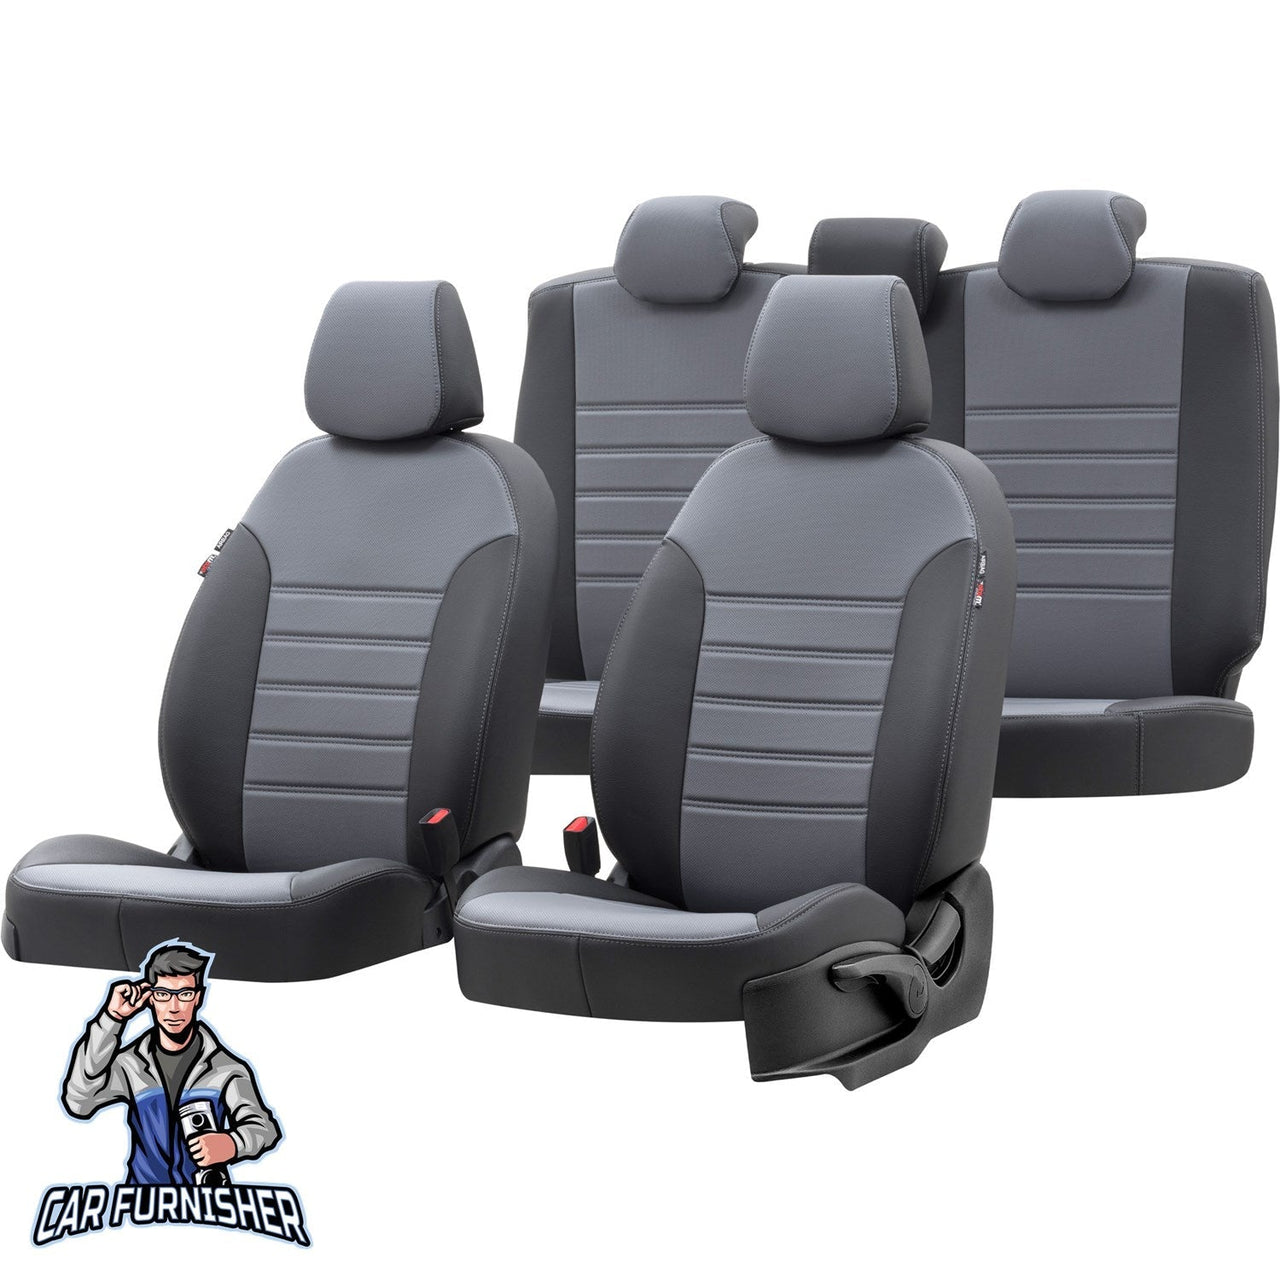 Audi Q2 Seat Cover Istanbul Leather Design Smoked Black Leather